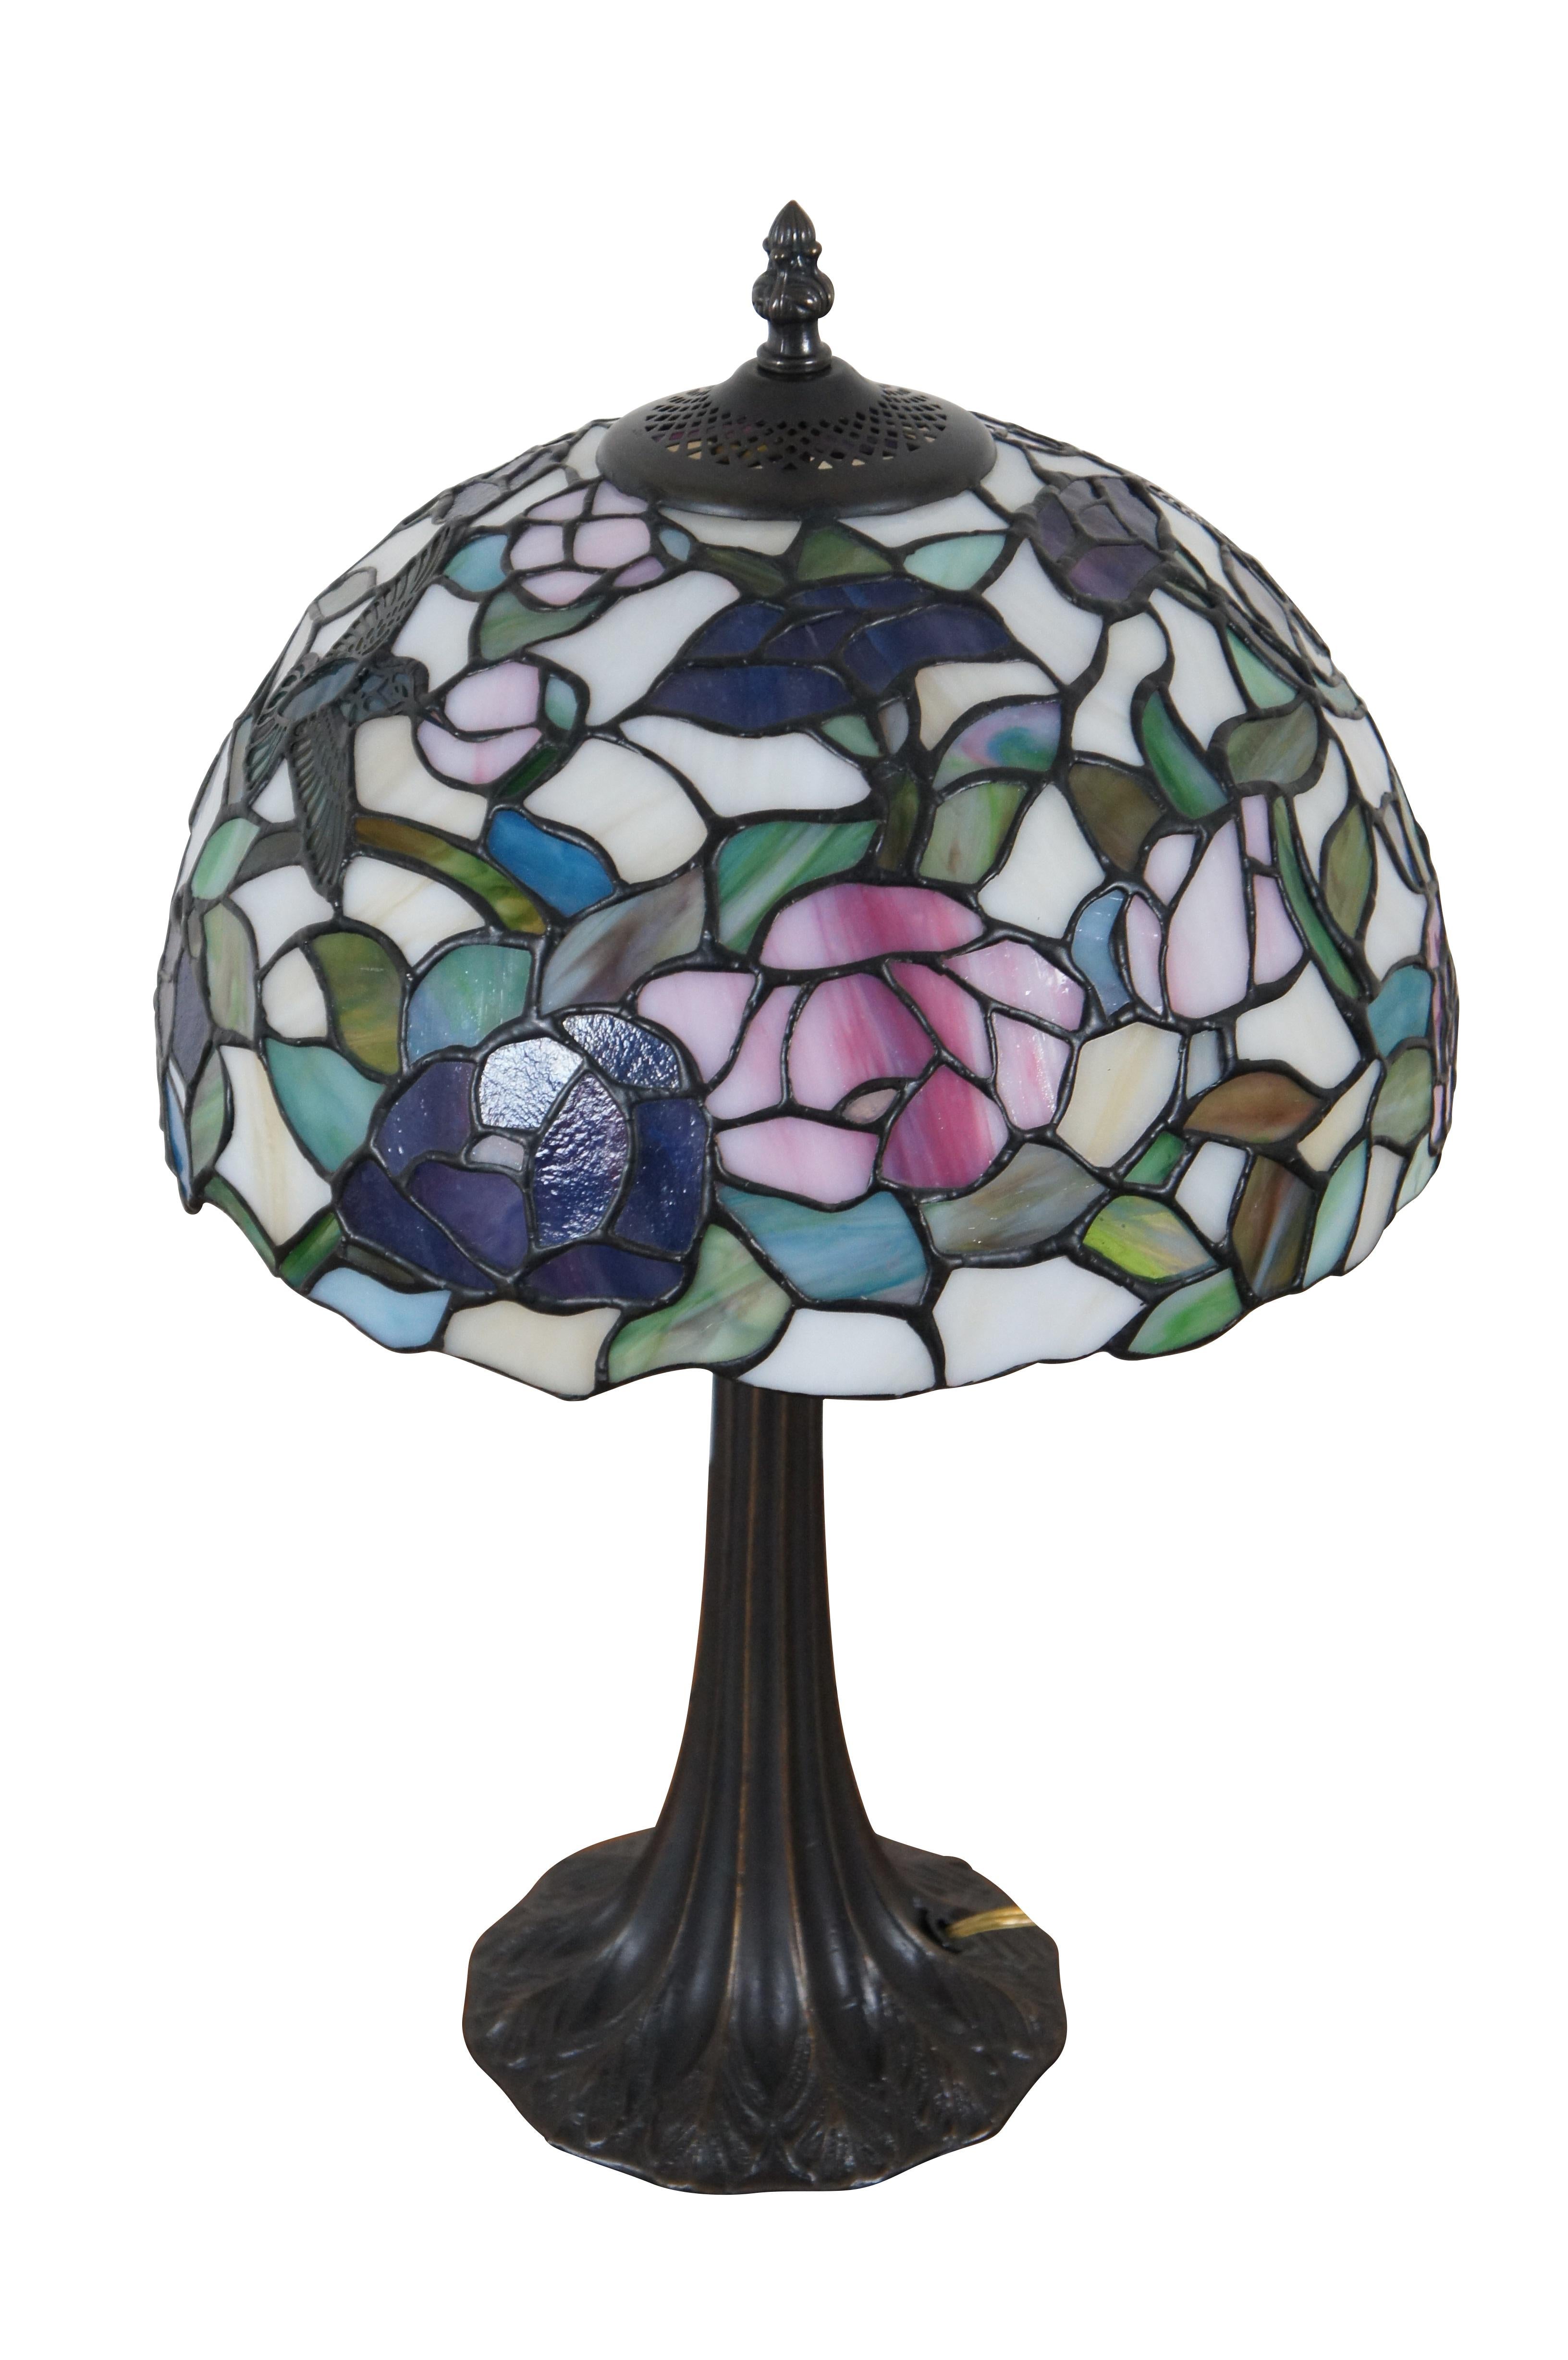 Vintage Tiffany style parlor table lamp.  Made of stained glass featuring Art Nouveau styling with a floral / rose and Hummingbird shade and leaf design tapered body.

Dimensions:
12.25” x 19.25” (Diameter x Height)